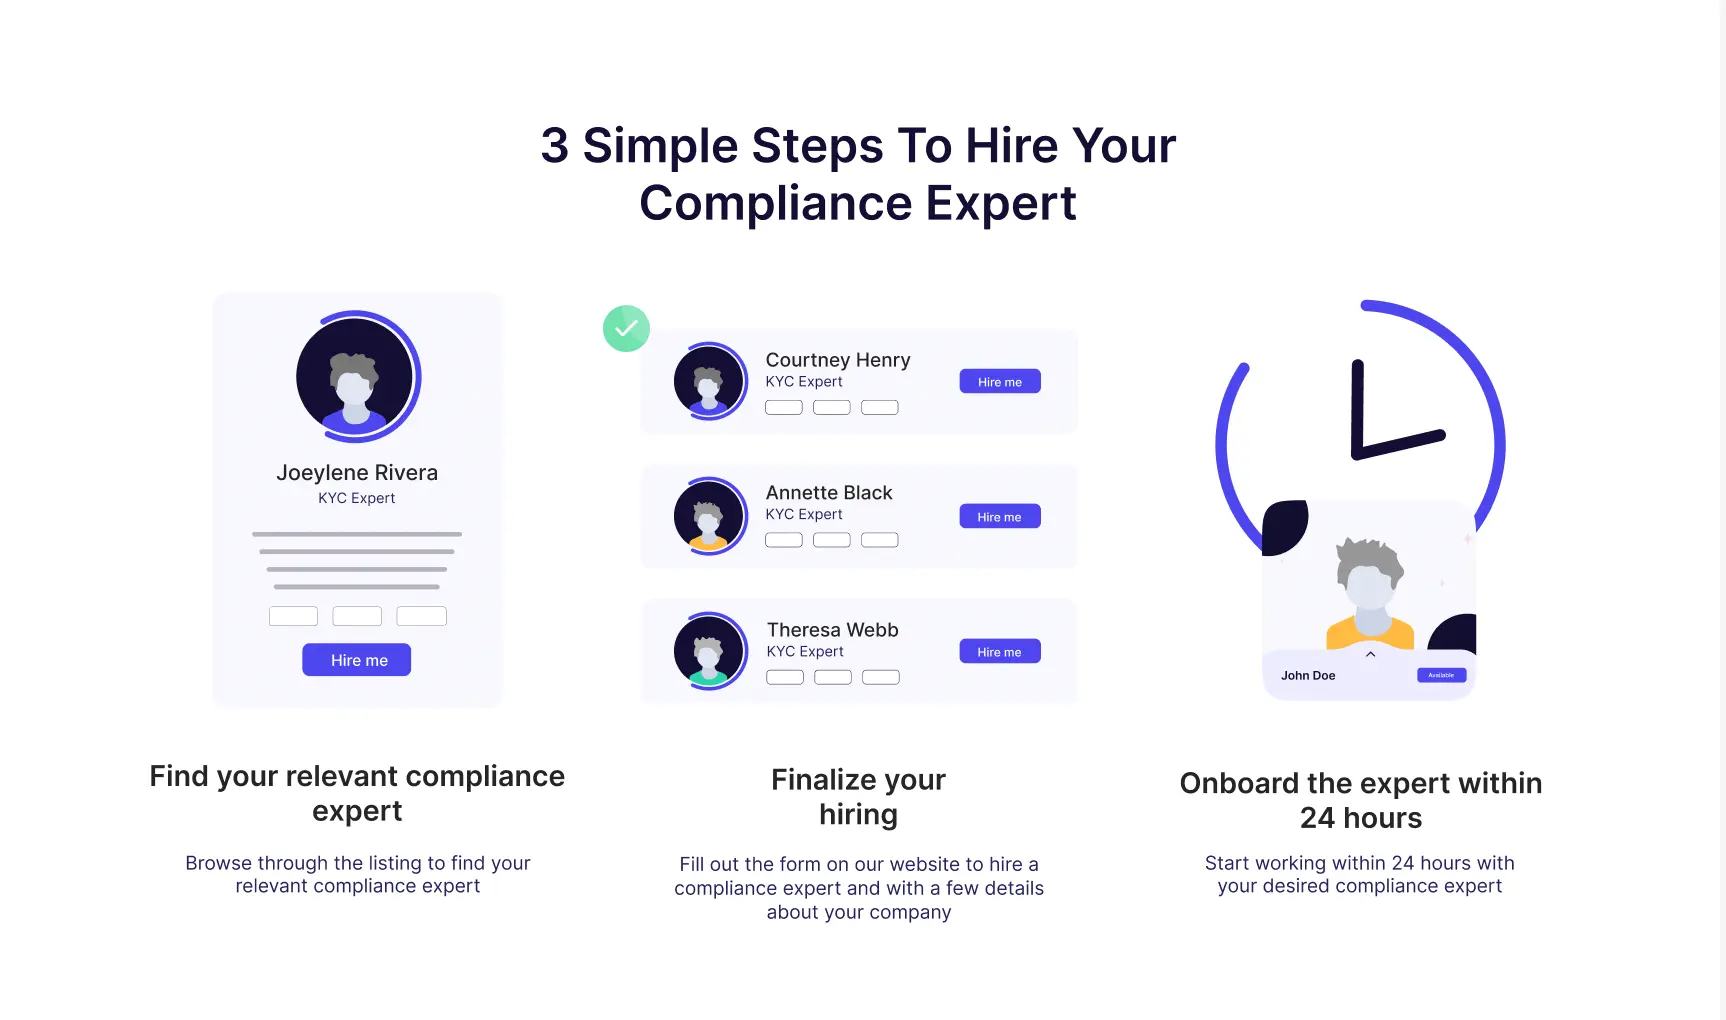 Here are 3 Steps for Hiring a Compliance Professional via CaaS Marketplace of KYC AML Guide.